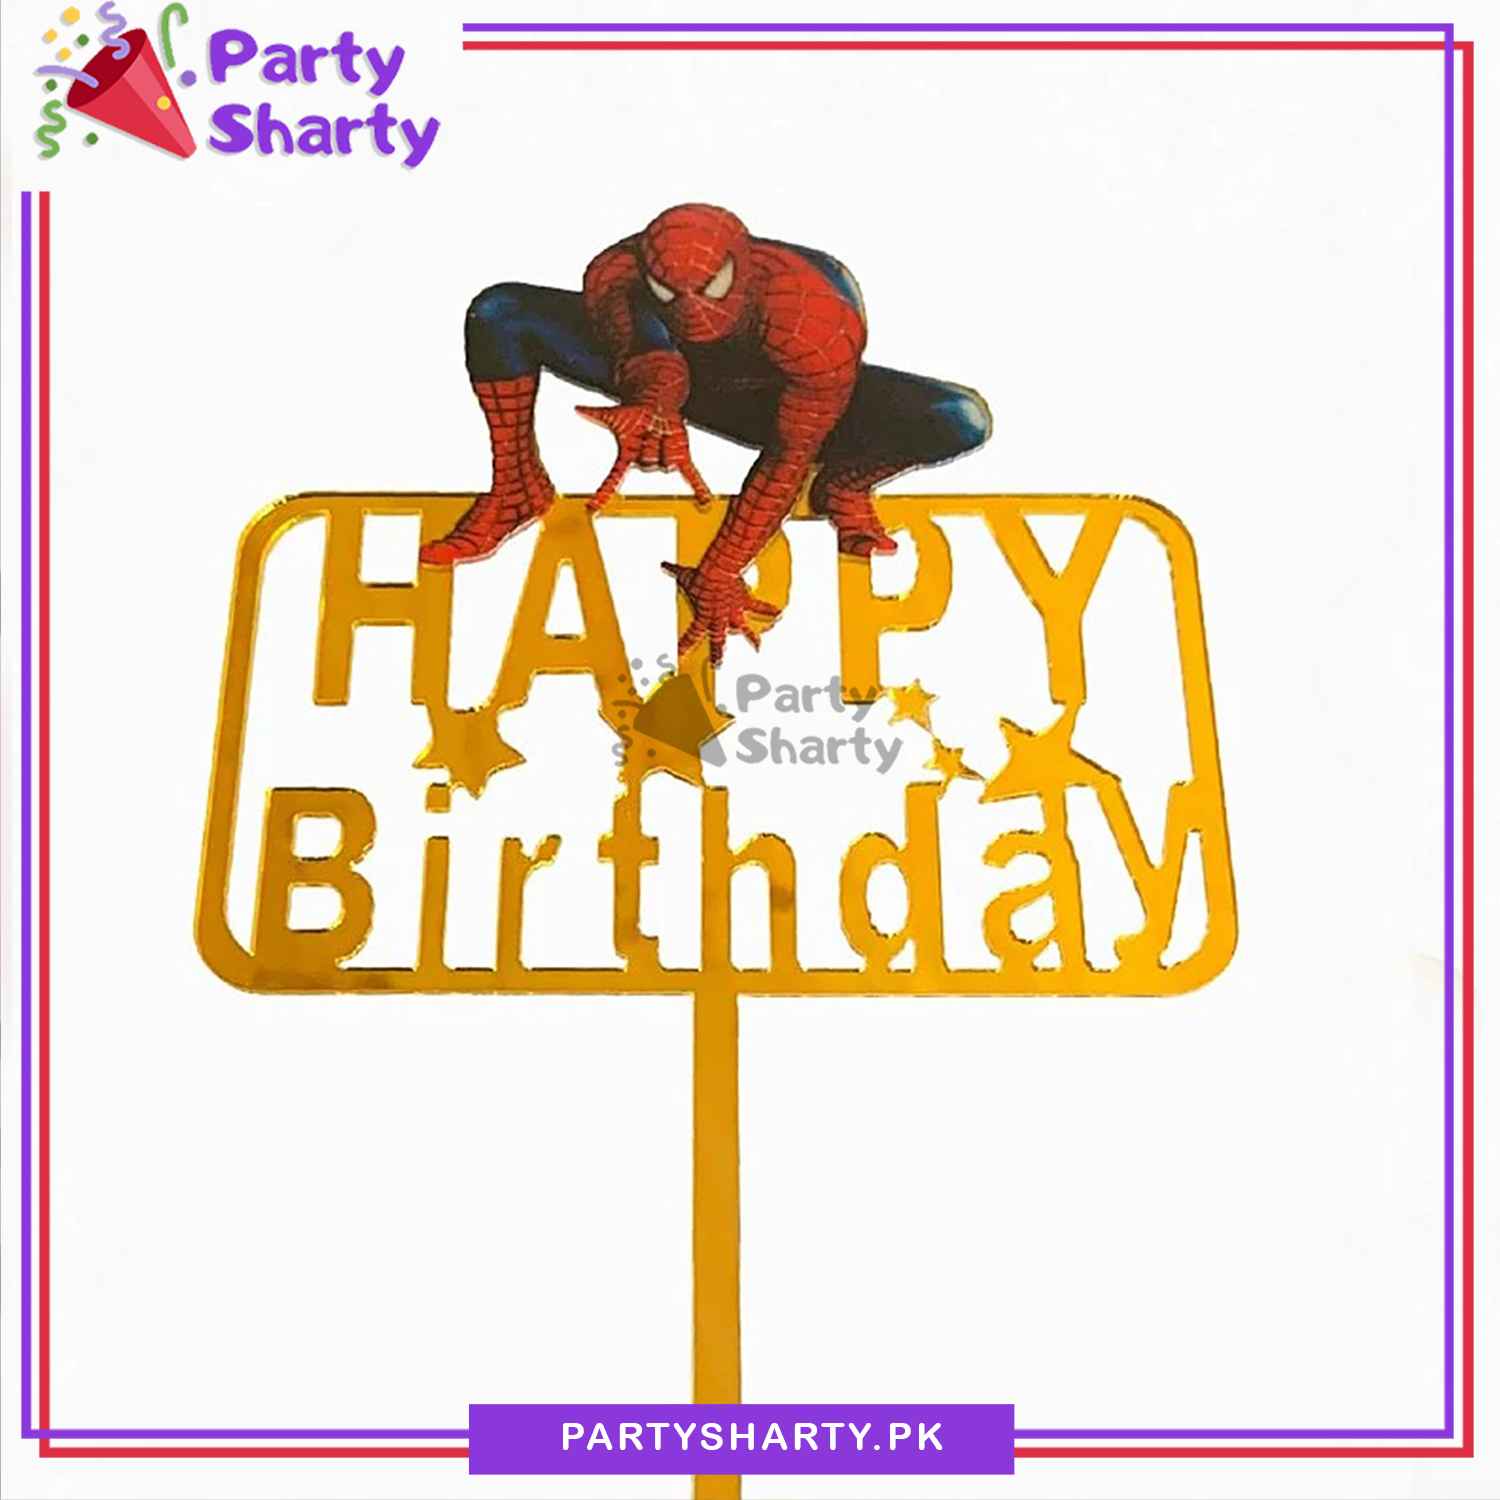 Spiderman Theme Acrylic Cake Topper for Birthday Party Celebration and Decoration